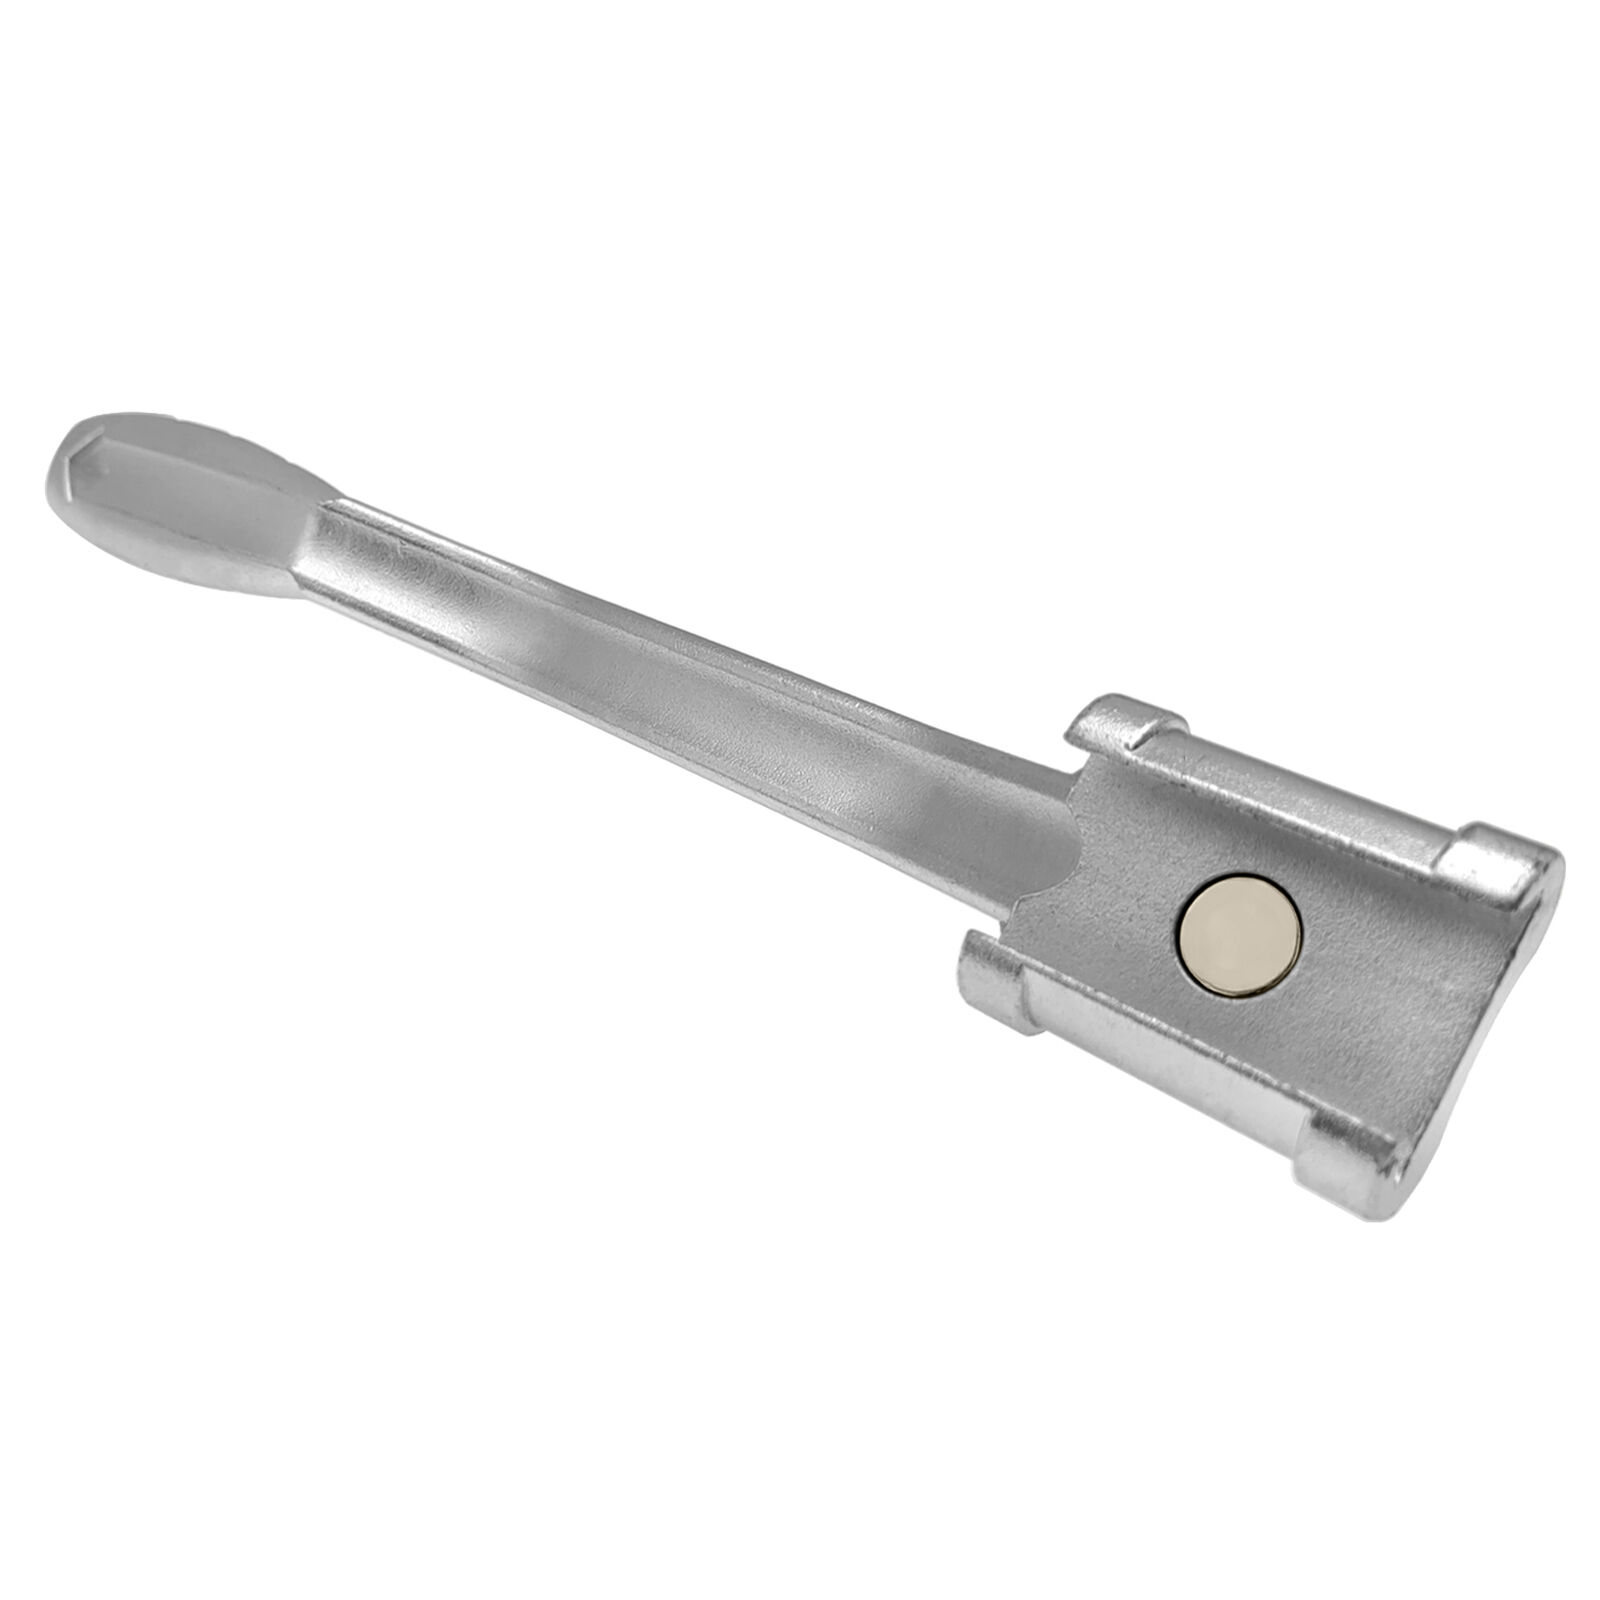 Extender Bar with Manget 13.5 Inch Extension  with 1/2 Inch W8T6